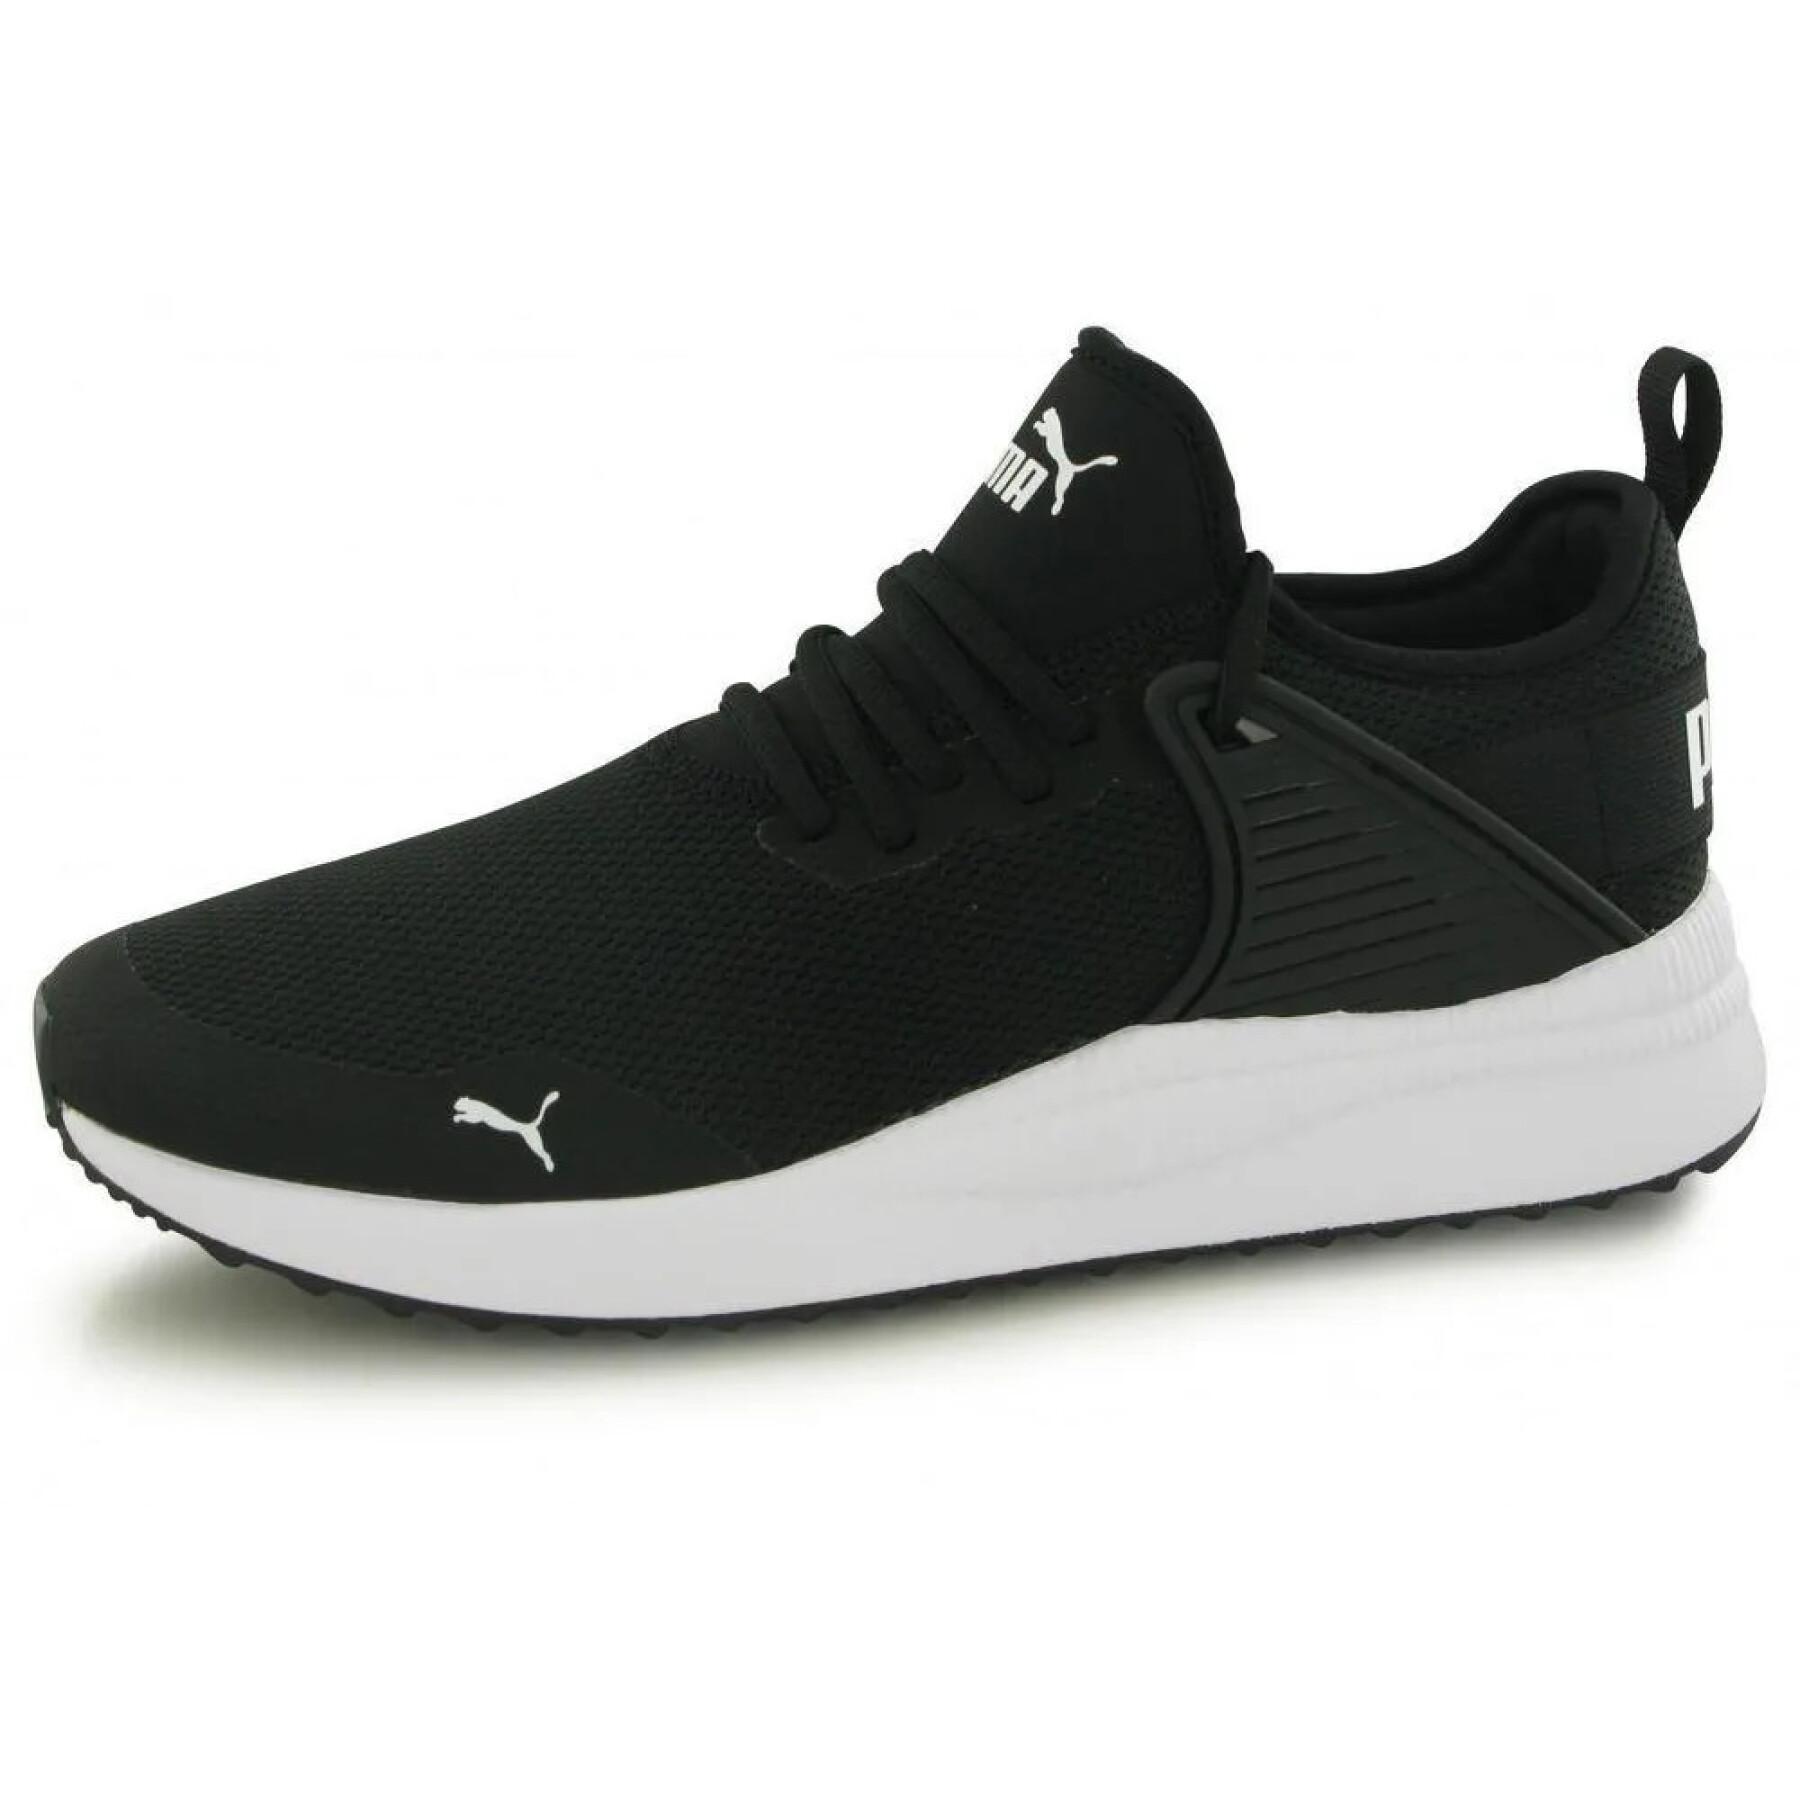 Buty Puma Pacer next cage core